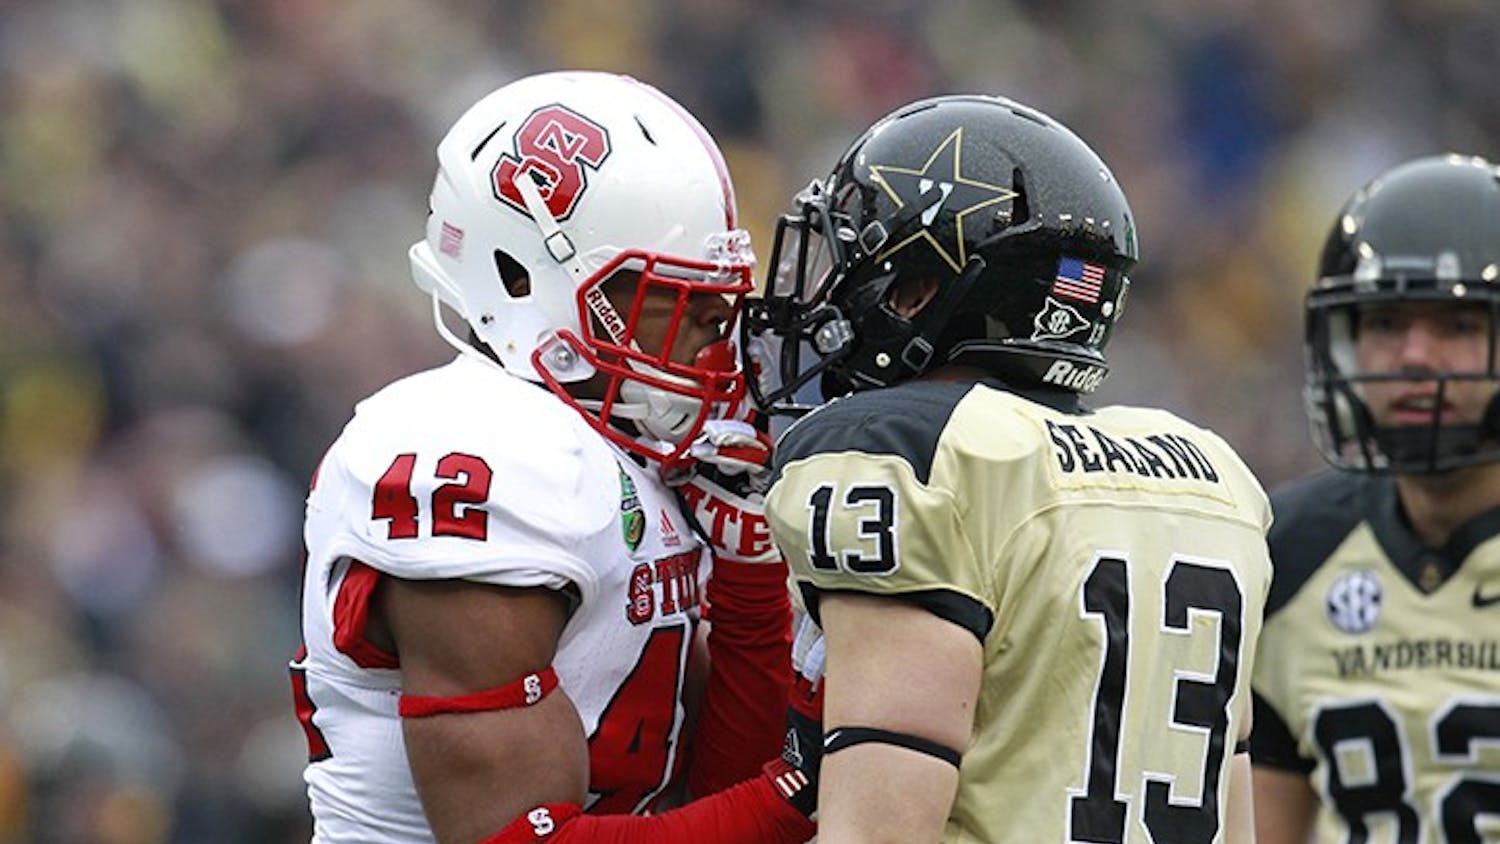 N.C. State&apos;s M.J. Salahuddin (42) has words with Vanderbilt&apos;s Jake Sealand (13) during the first half of the Franklin American Mortgage Music City Bowl at LP Field in Nashville, Tennessee, Monday, December 31, 2012. The Vanderbilt Commodores defeated the N.C. State Wolfpack, 38-24. (Ethan Hyman/Raleigh News &amp; Observer/MCT)